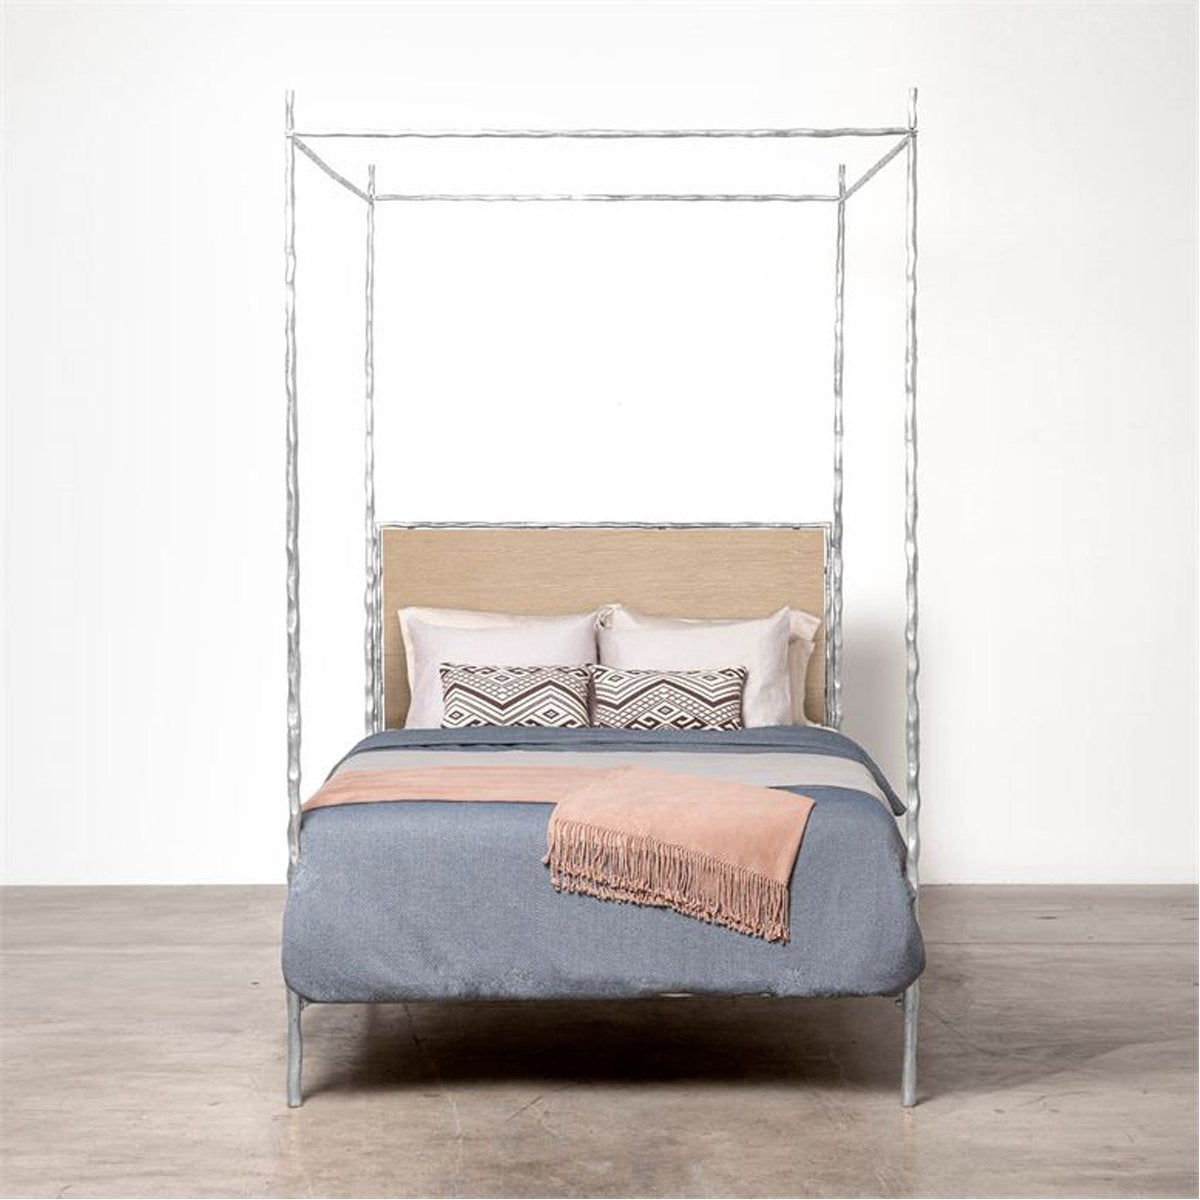 Made Goods Brennan Short Textured Canopy Bed in Garonne Leather